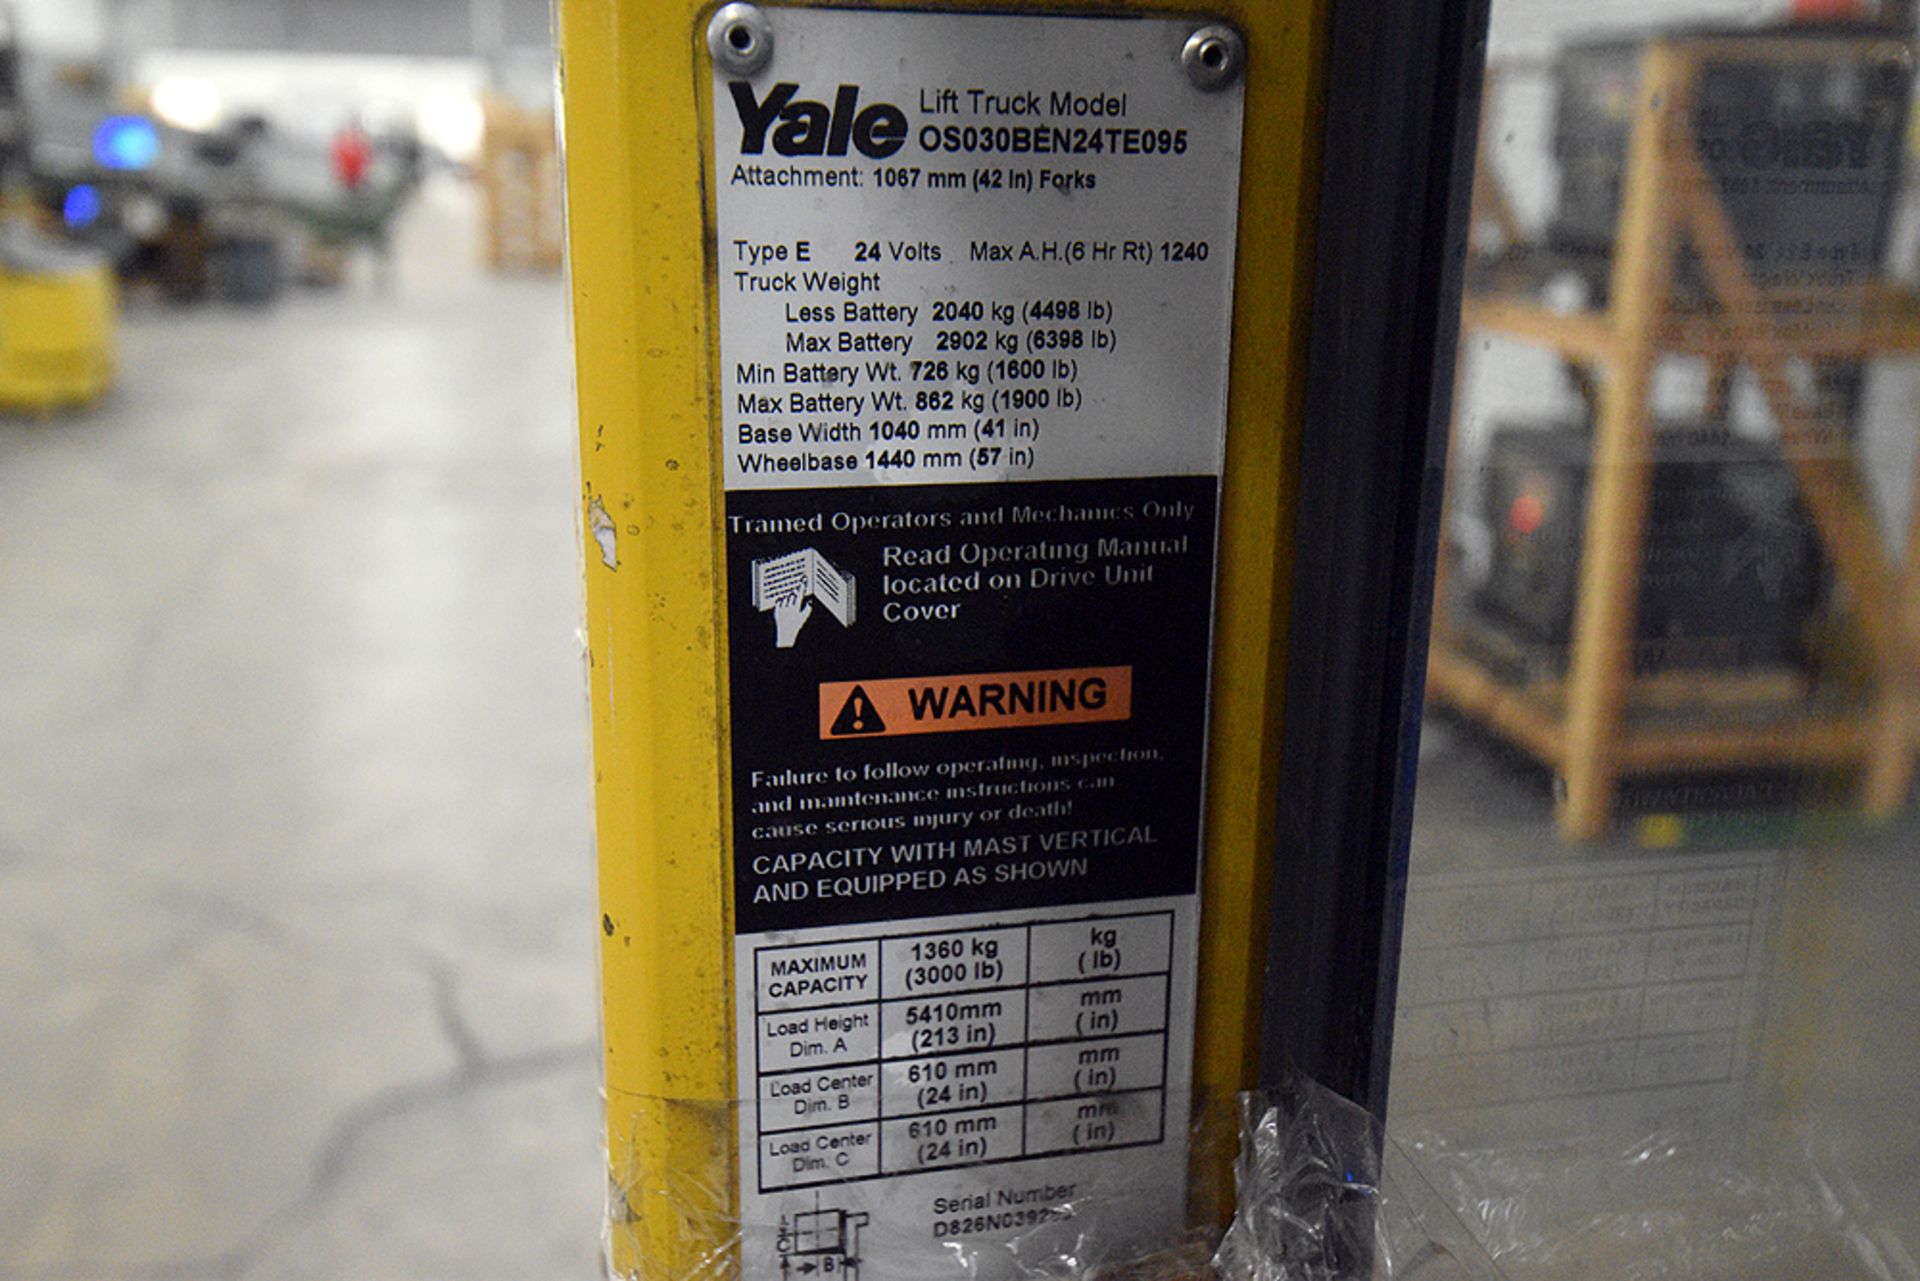 Yale 3,000 lbs. Capacity, Order Picker w/ 213" Lift Height - Image 10 of 10